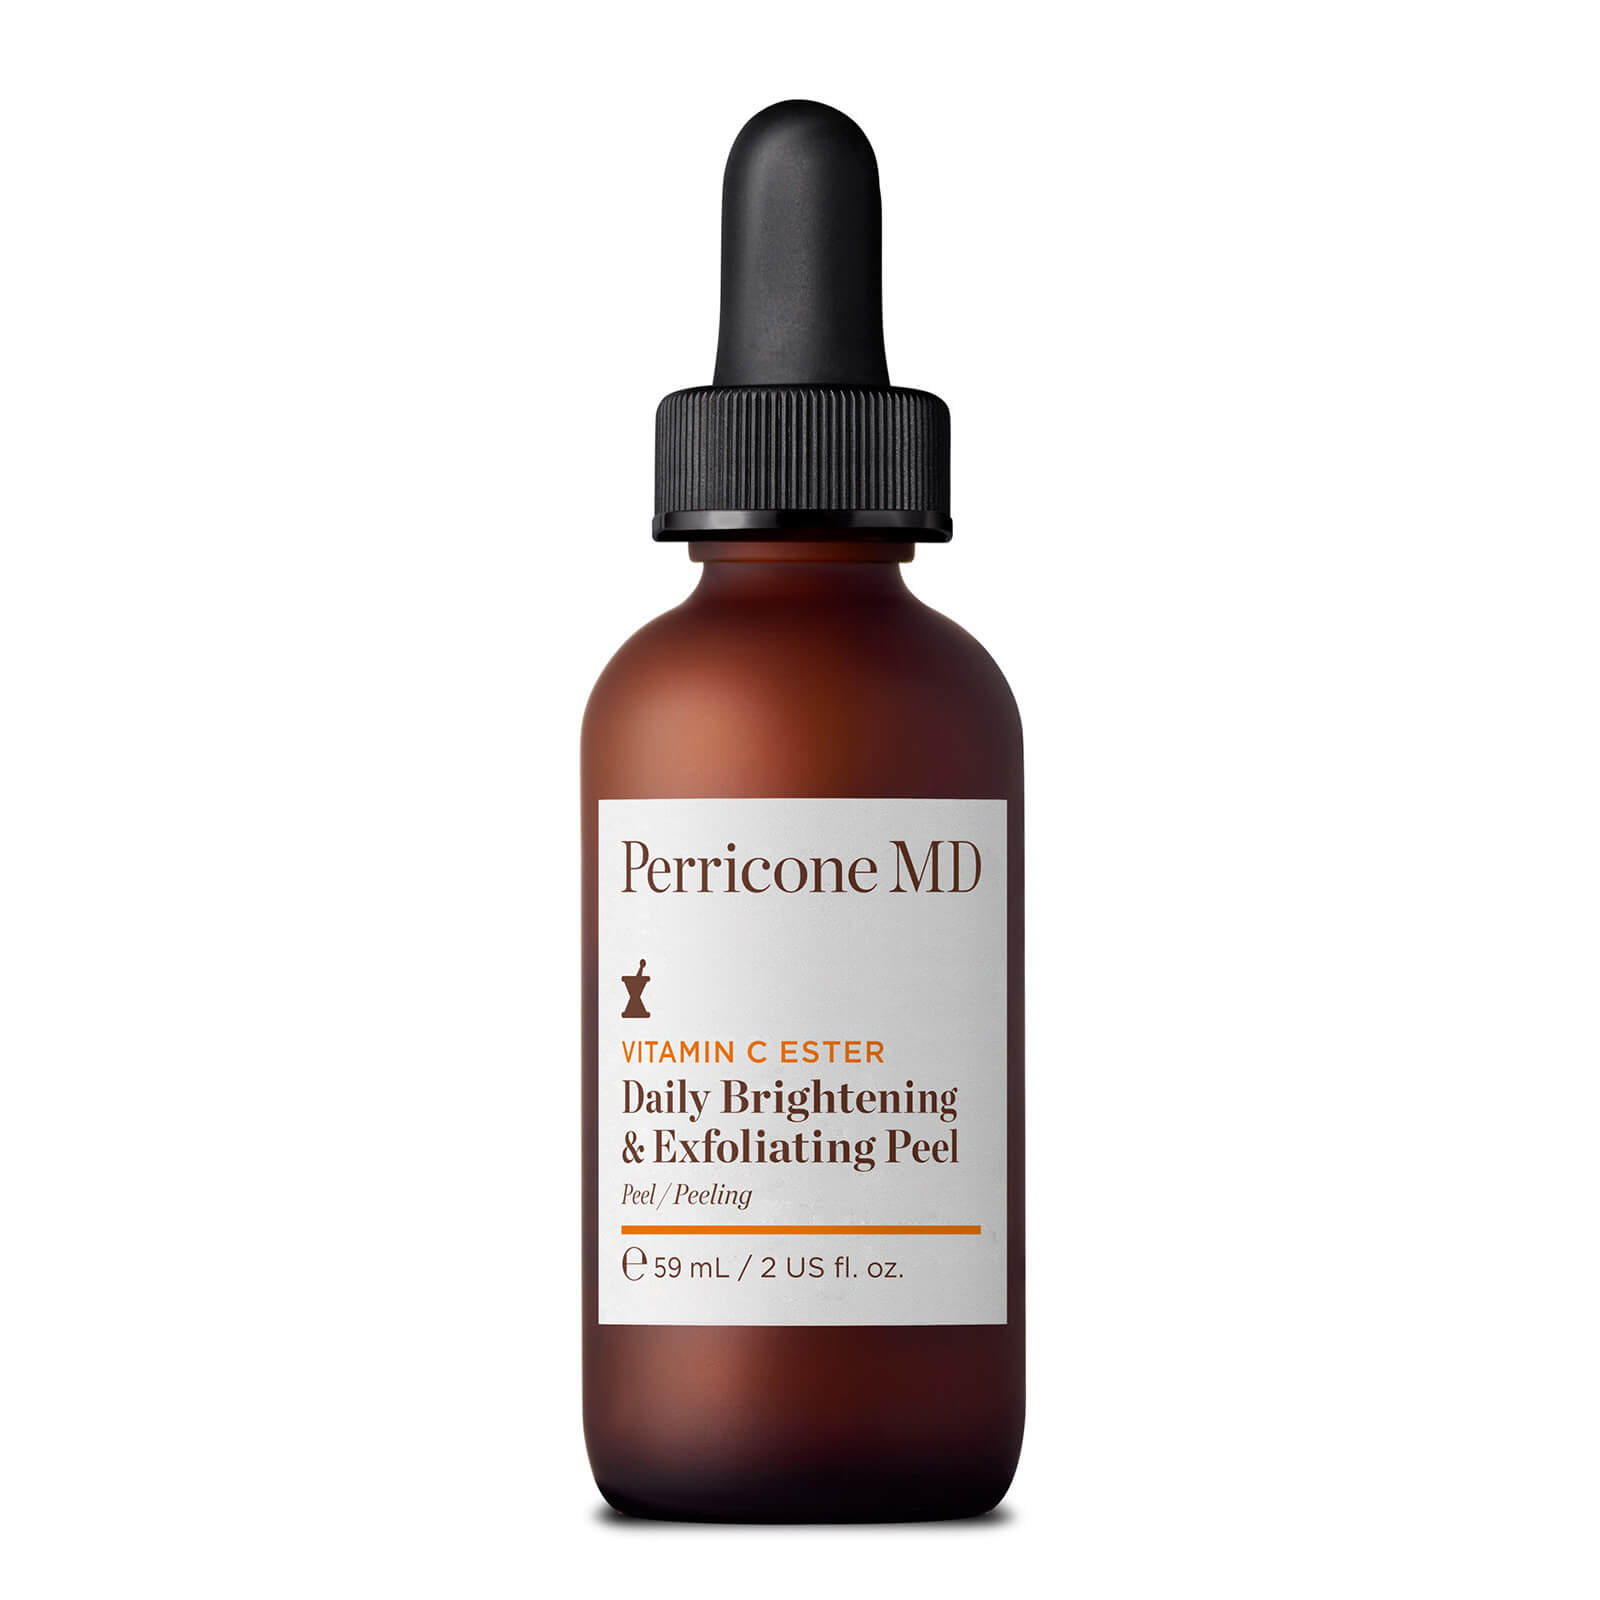 Image of Perricone MD Vitamin C Ester Daily Brightening and Exfoliating Peel 2 oz